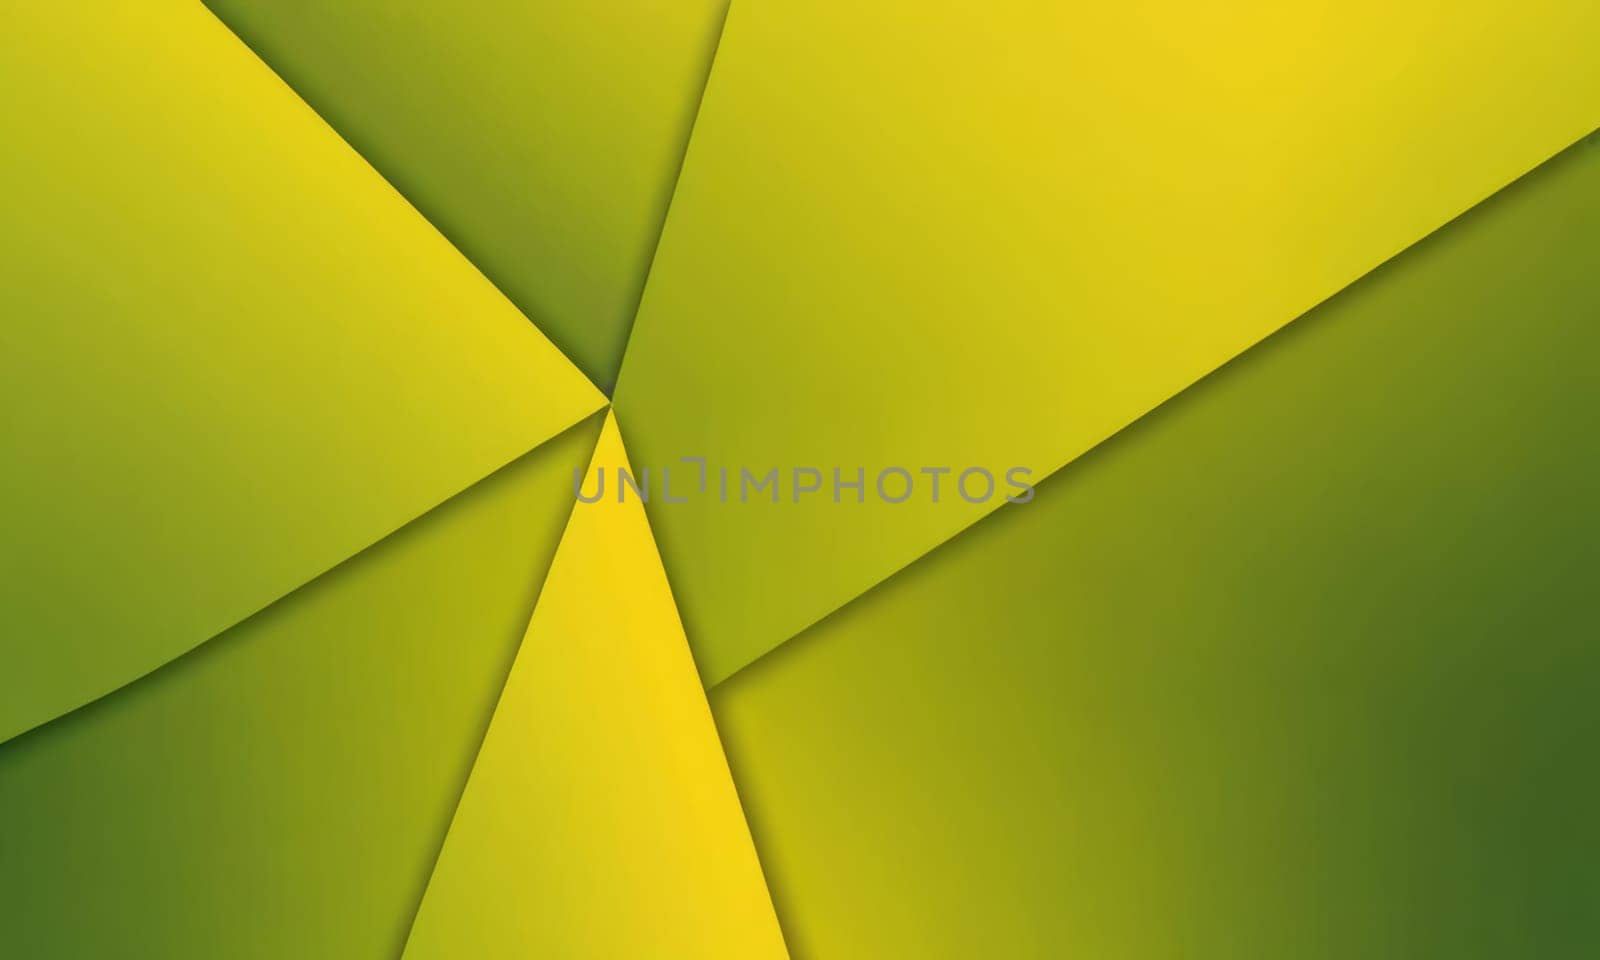 Trapezoidal Shapes in Olive Yellow by nkotlyar